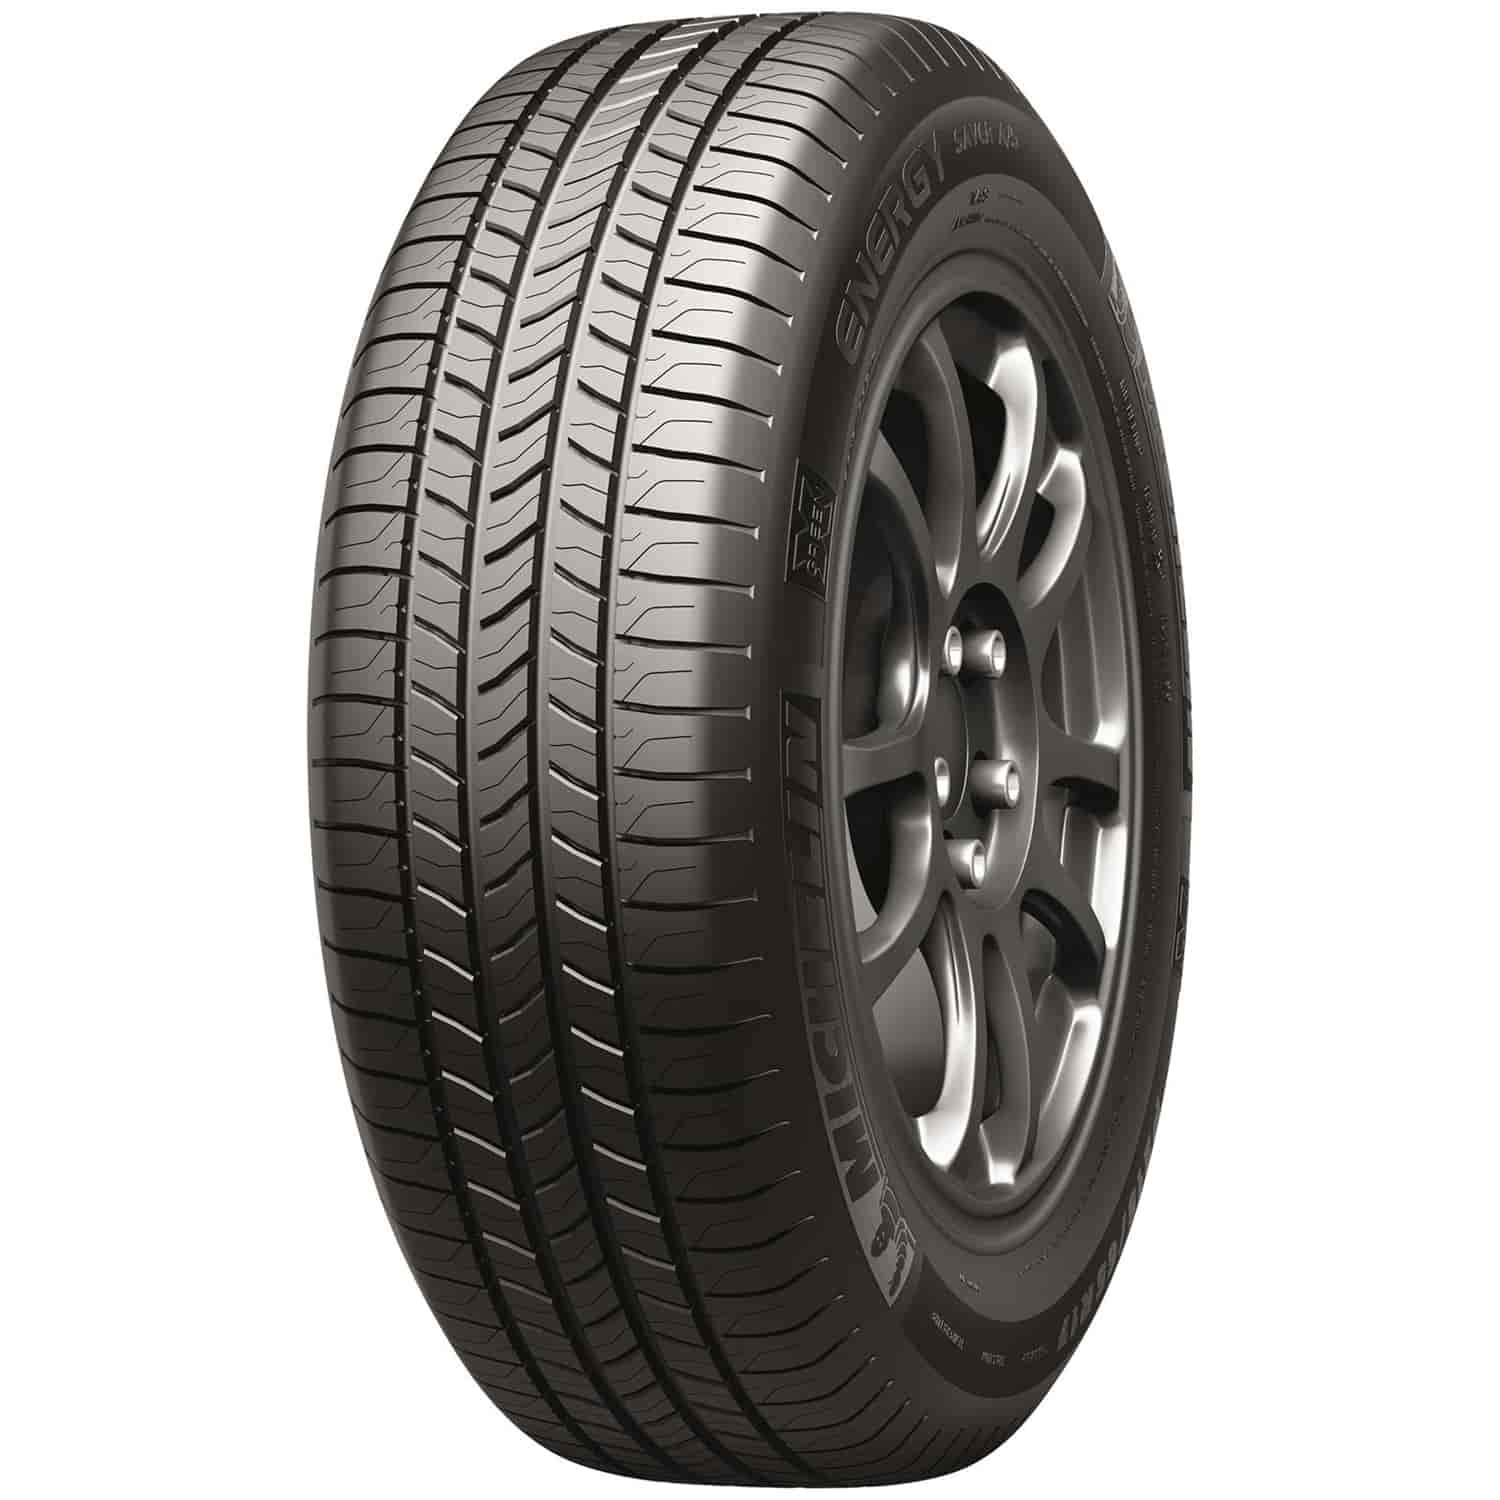 Energy Saver A/S P265/65R18 112T BSW